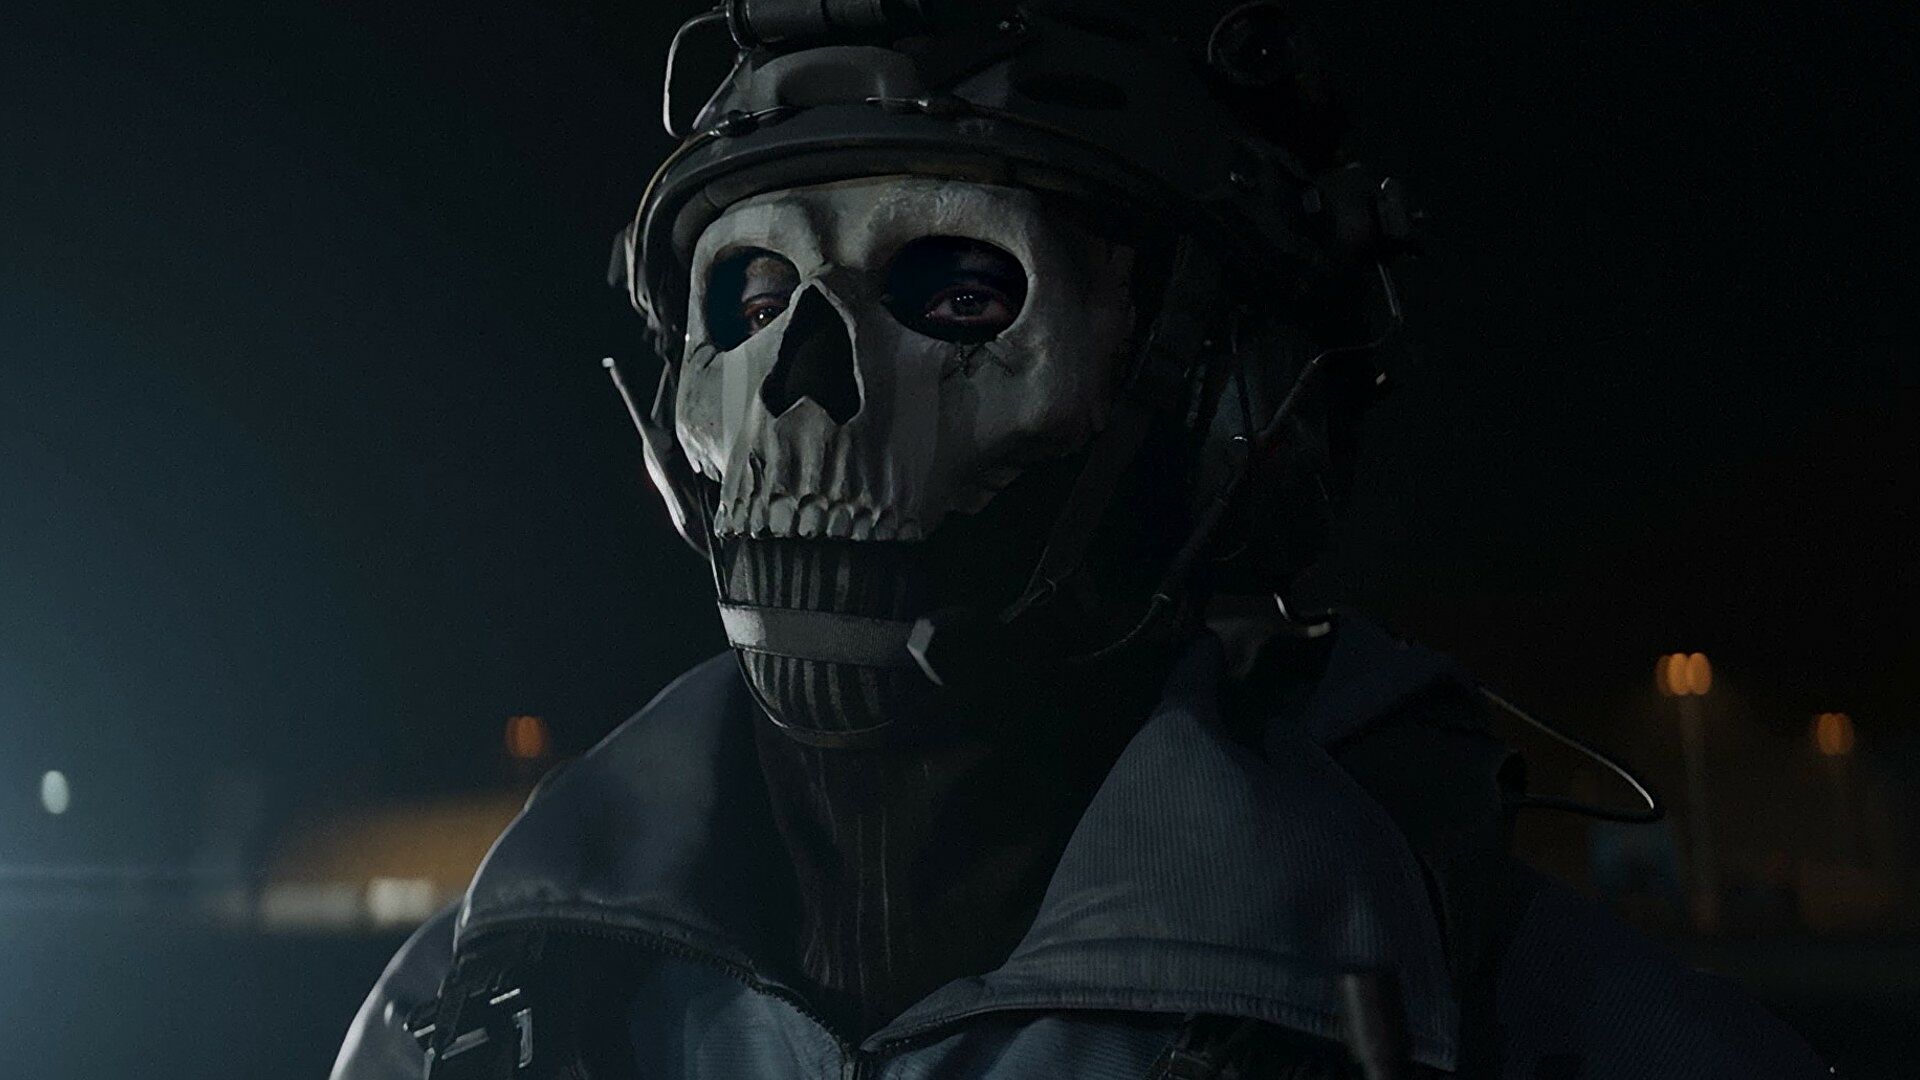 Call Of Duty Ghost Campaign Spin Off Is In The Works, Leaker Claims